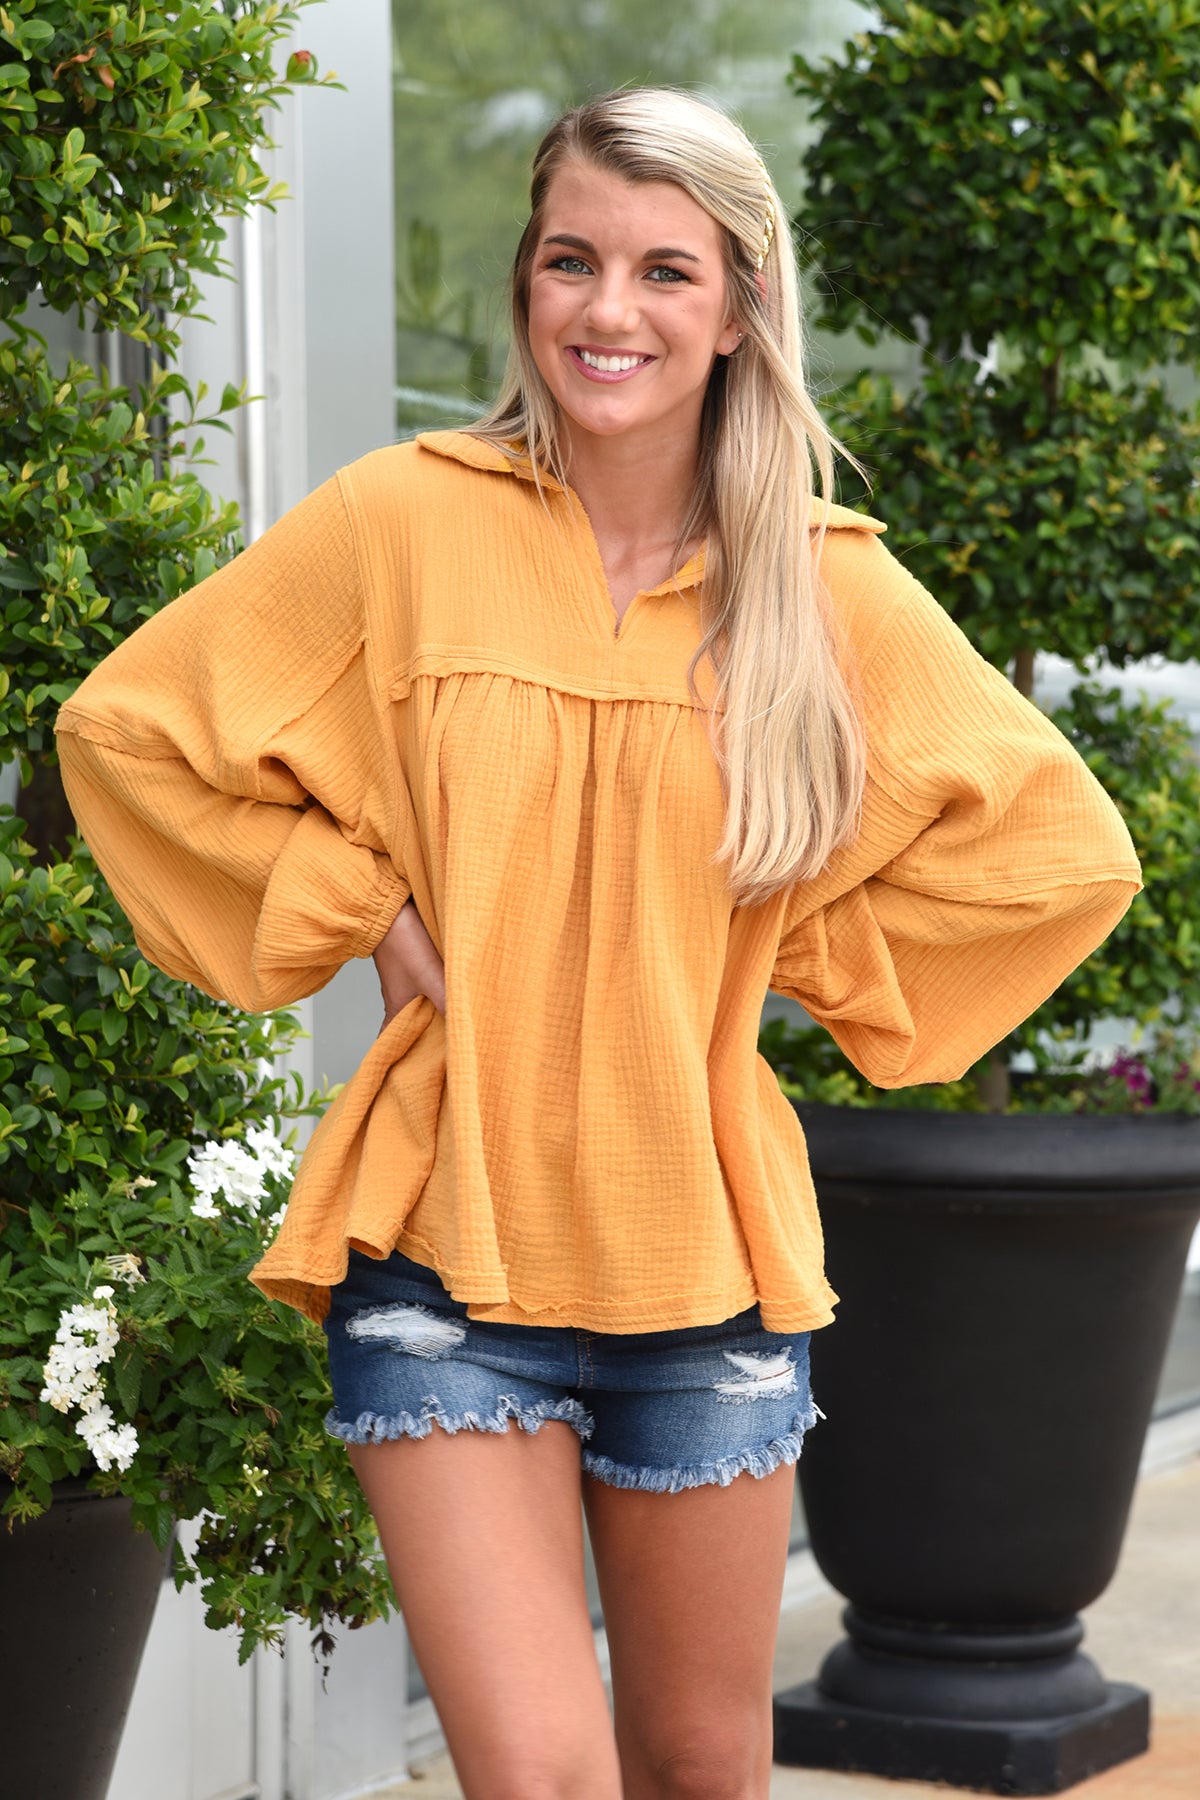 COME WITH ME TOP -MUSTARD YELLOW